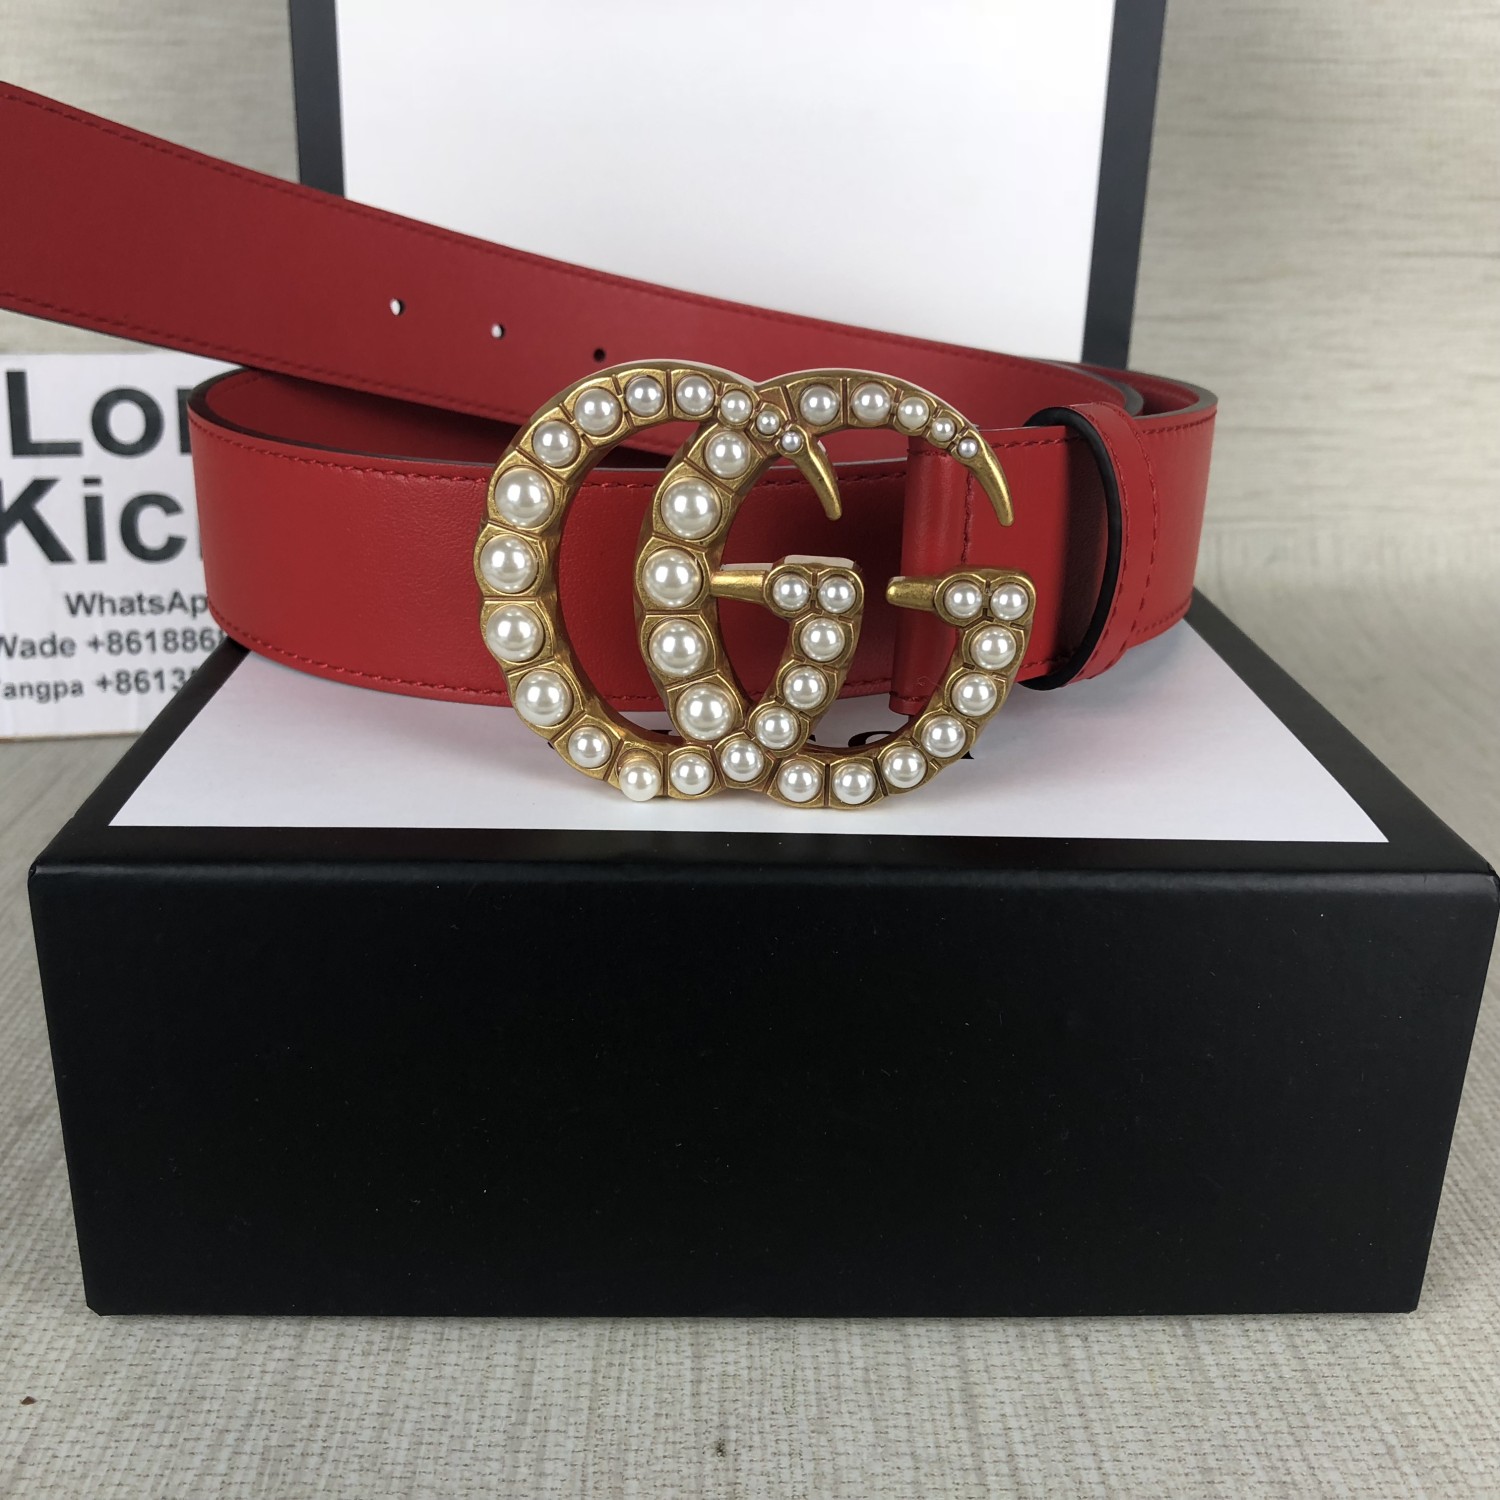 US$ 150 - Gucci leather belt with pearl Double G - nrd.kbic-nsn.gov